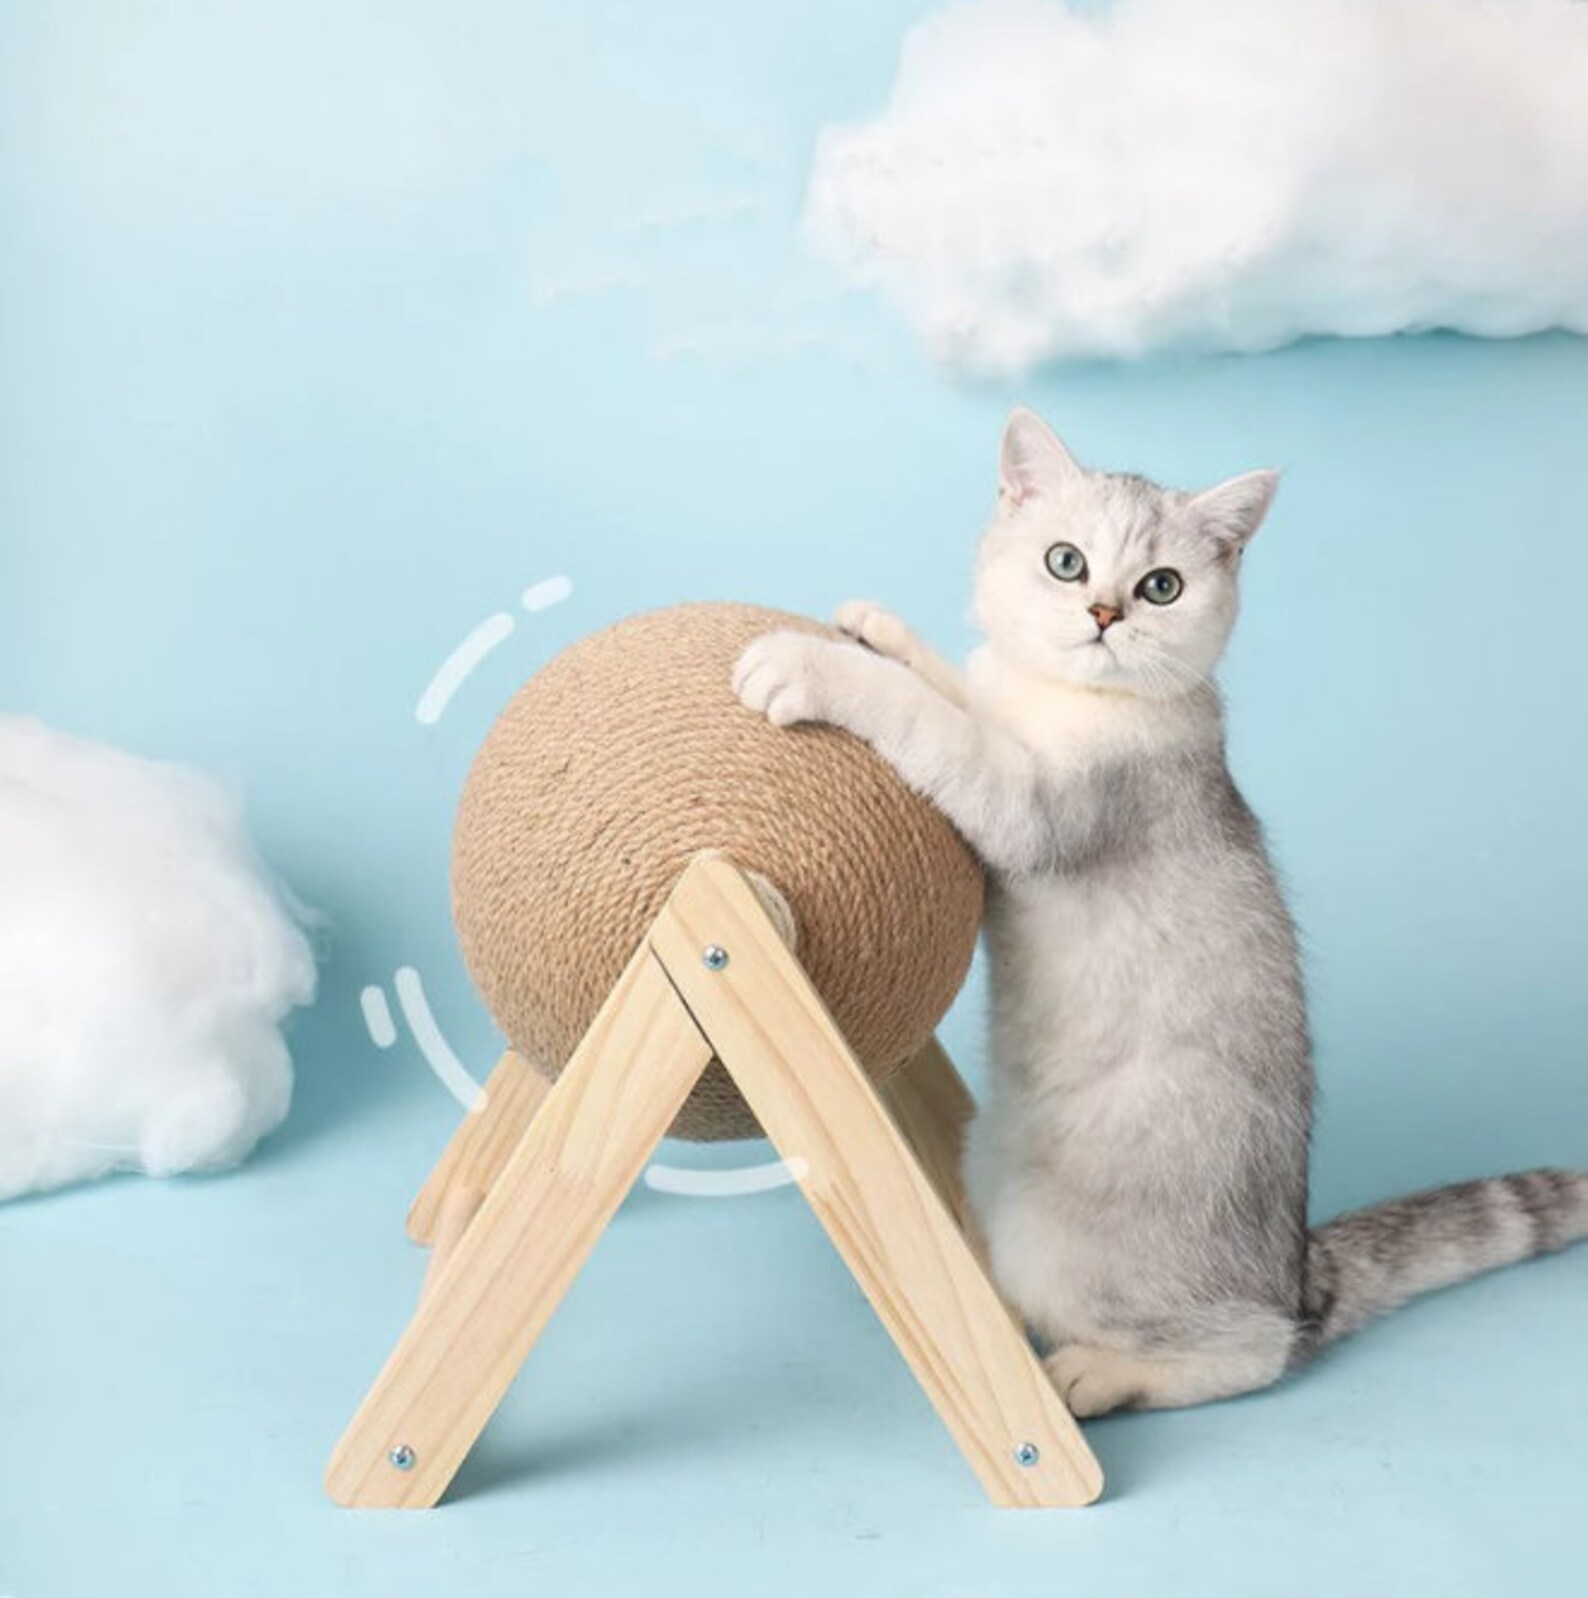 etsy.com | Cat Scratching Ball Toy Kitten Sisal Rope Ball Board Grinding Paws Toys Cats Scratcher Wear-Resistant Pet Furniture Supplies